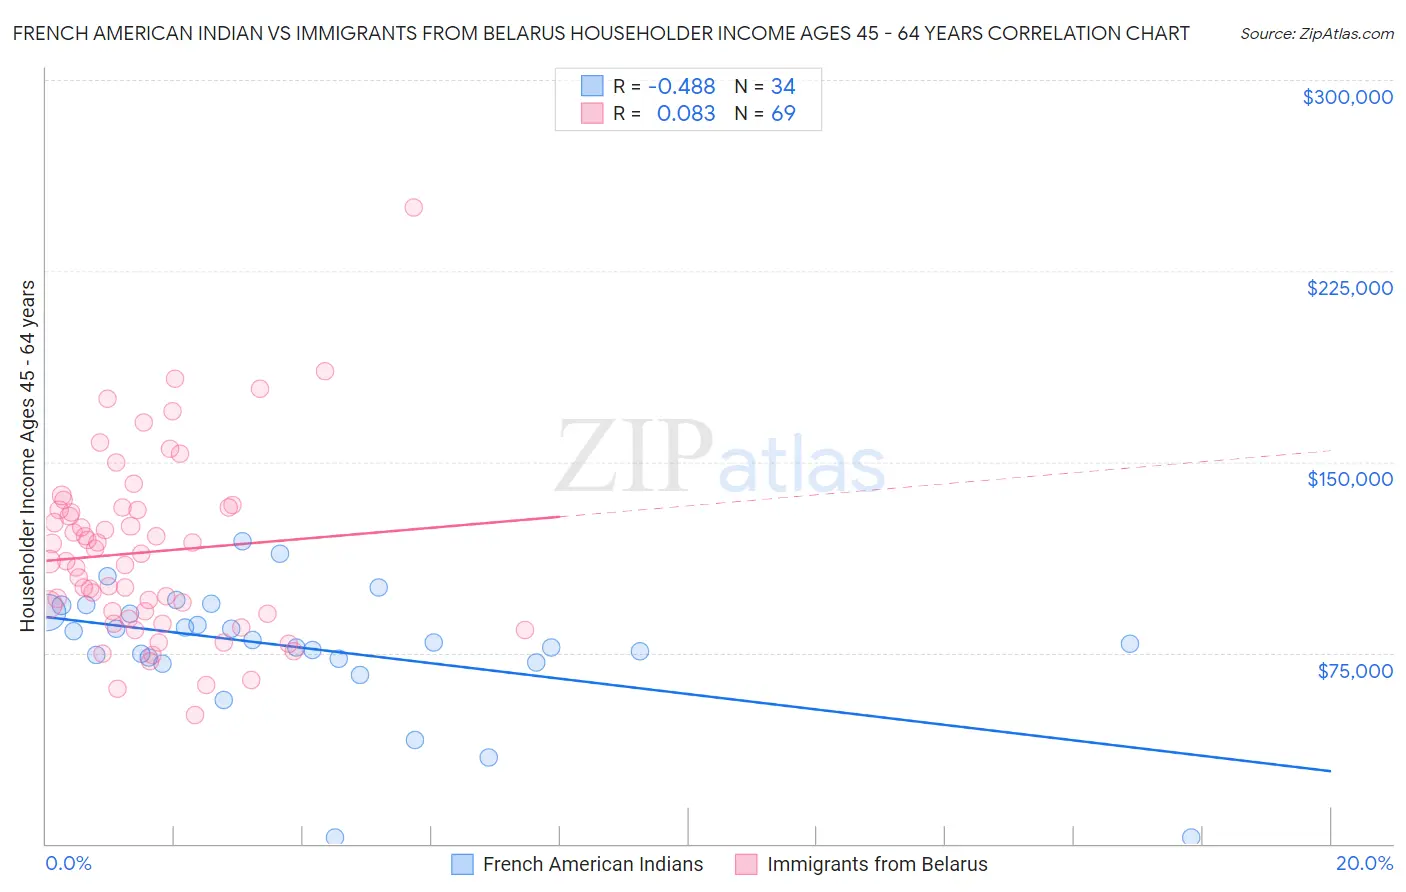 French American Indian vs Immigrants from Belarus Householder Income Ages 45 - 64 years